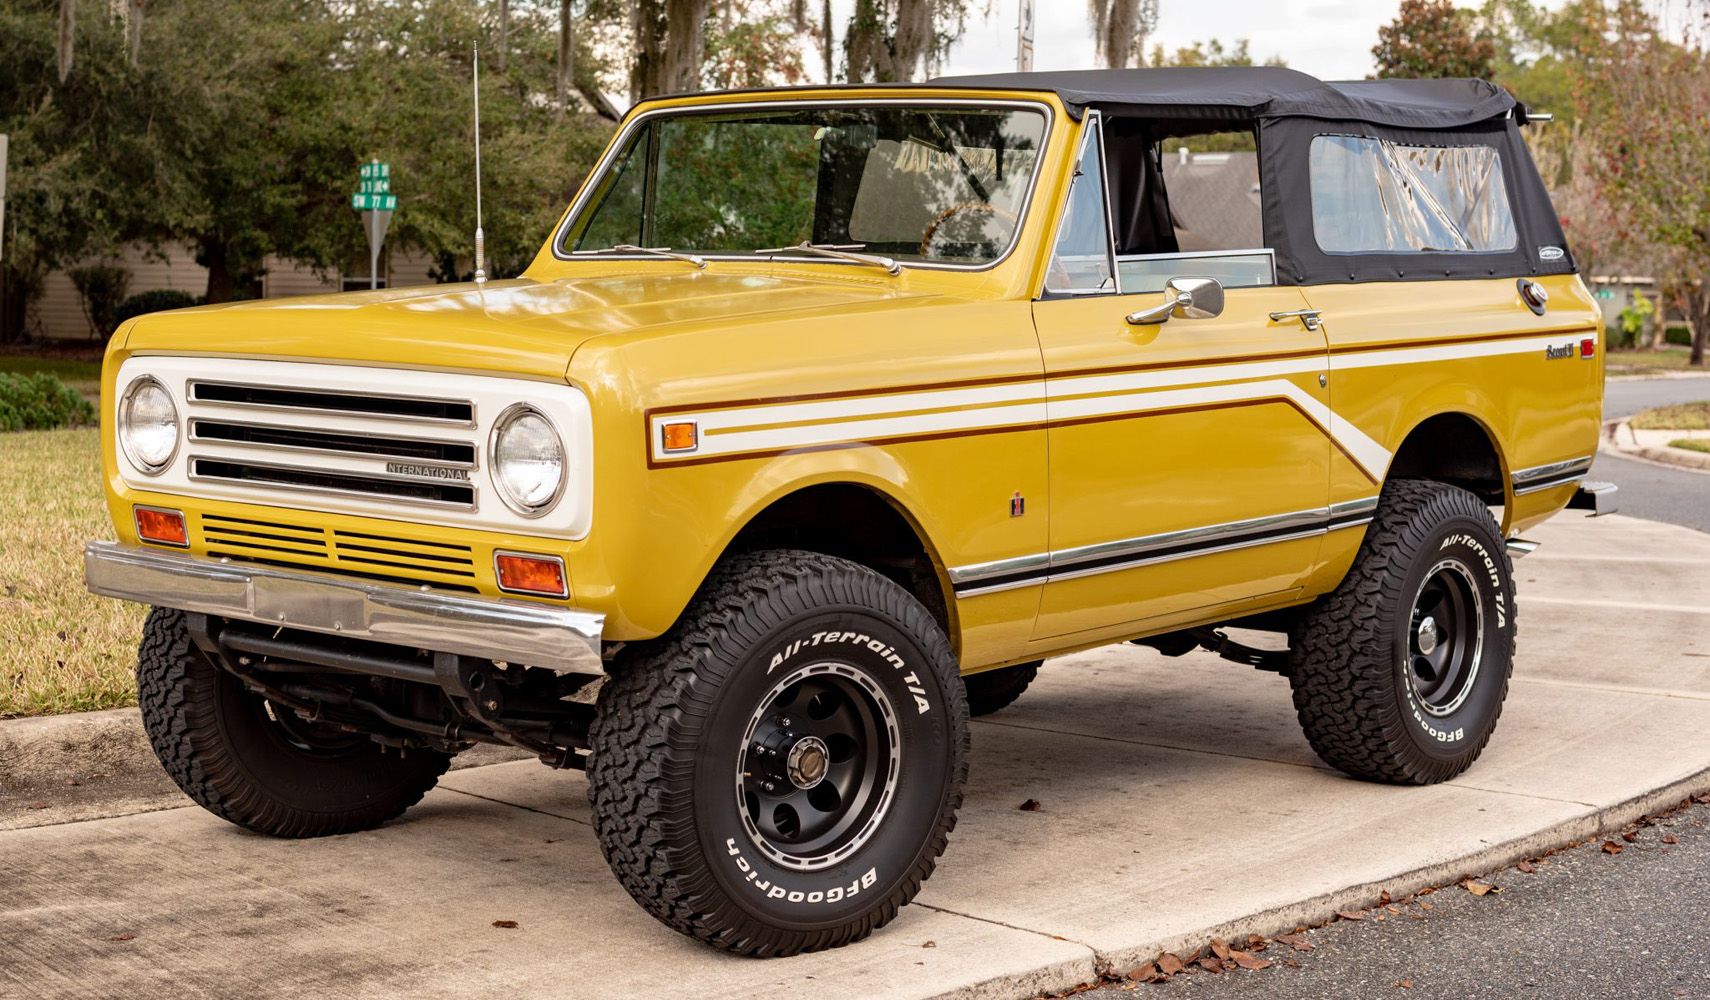 1972 International Harvester Scout II Classic SUV's Value Might Skyrocket